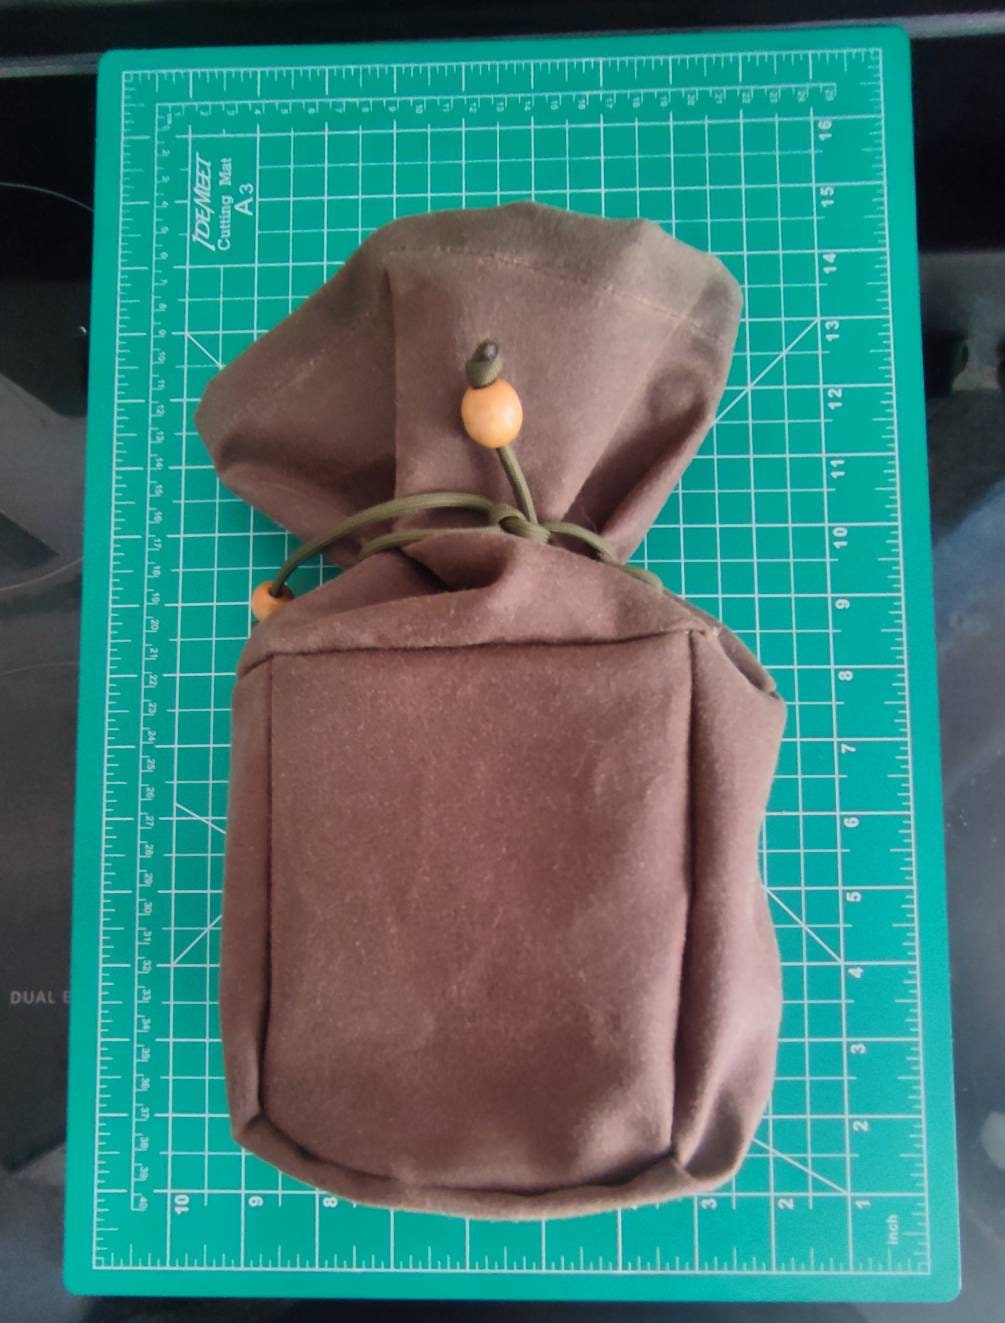 Canvas Zipper Pouches – Canvastry